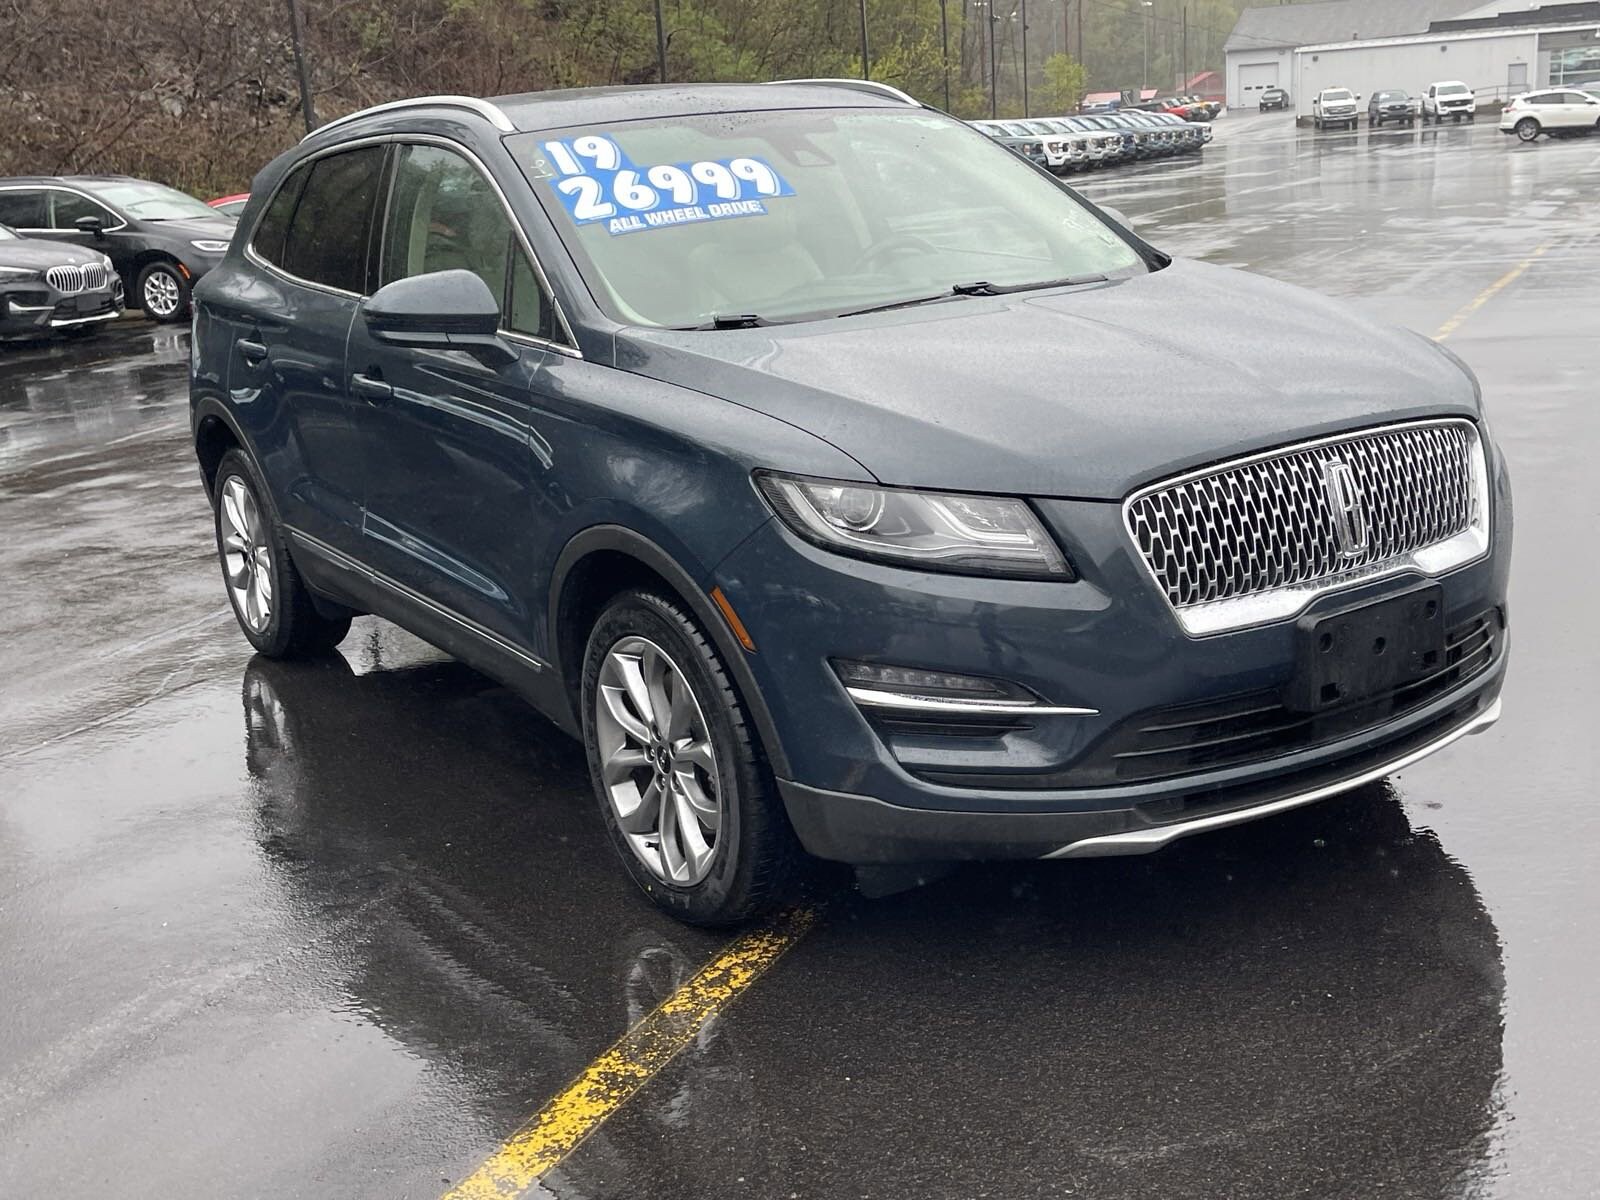 New Baltic Sea Green Color For 2019 Lincoln MKC: First Look